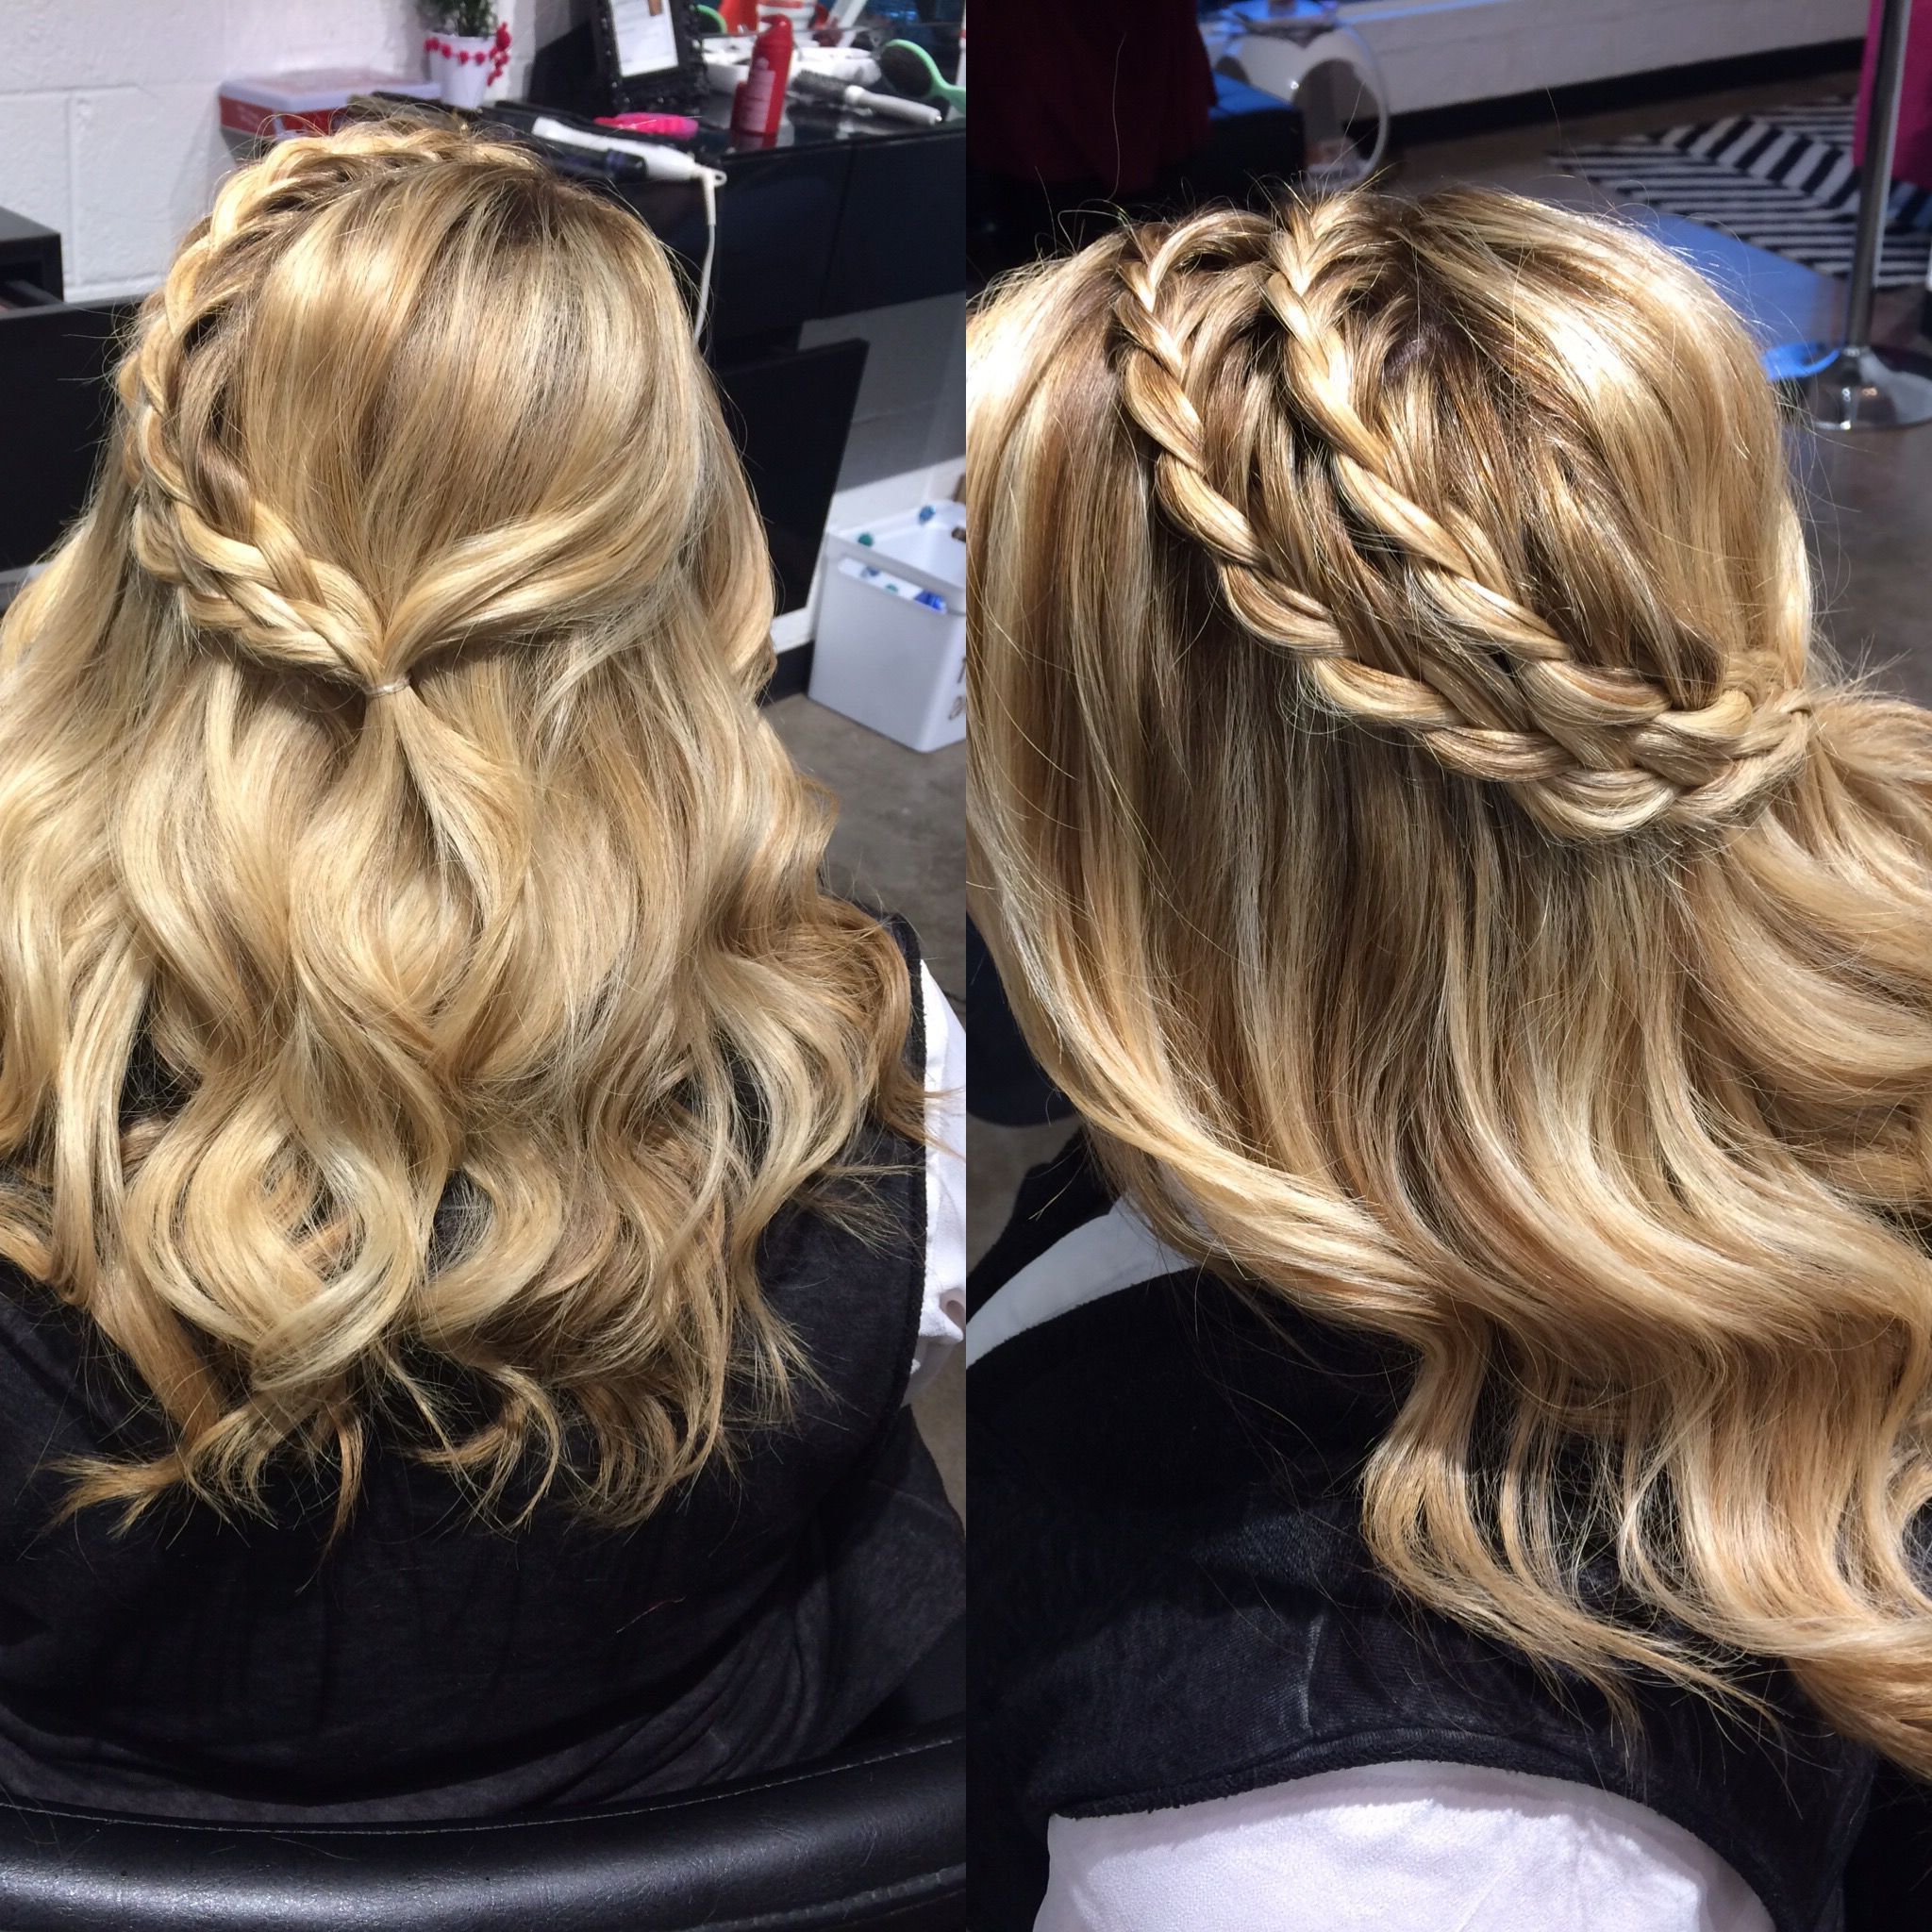 Double Lace Braid😍 (with Images) (View 3 of 20)